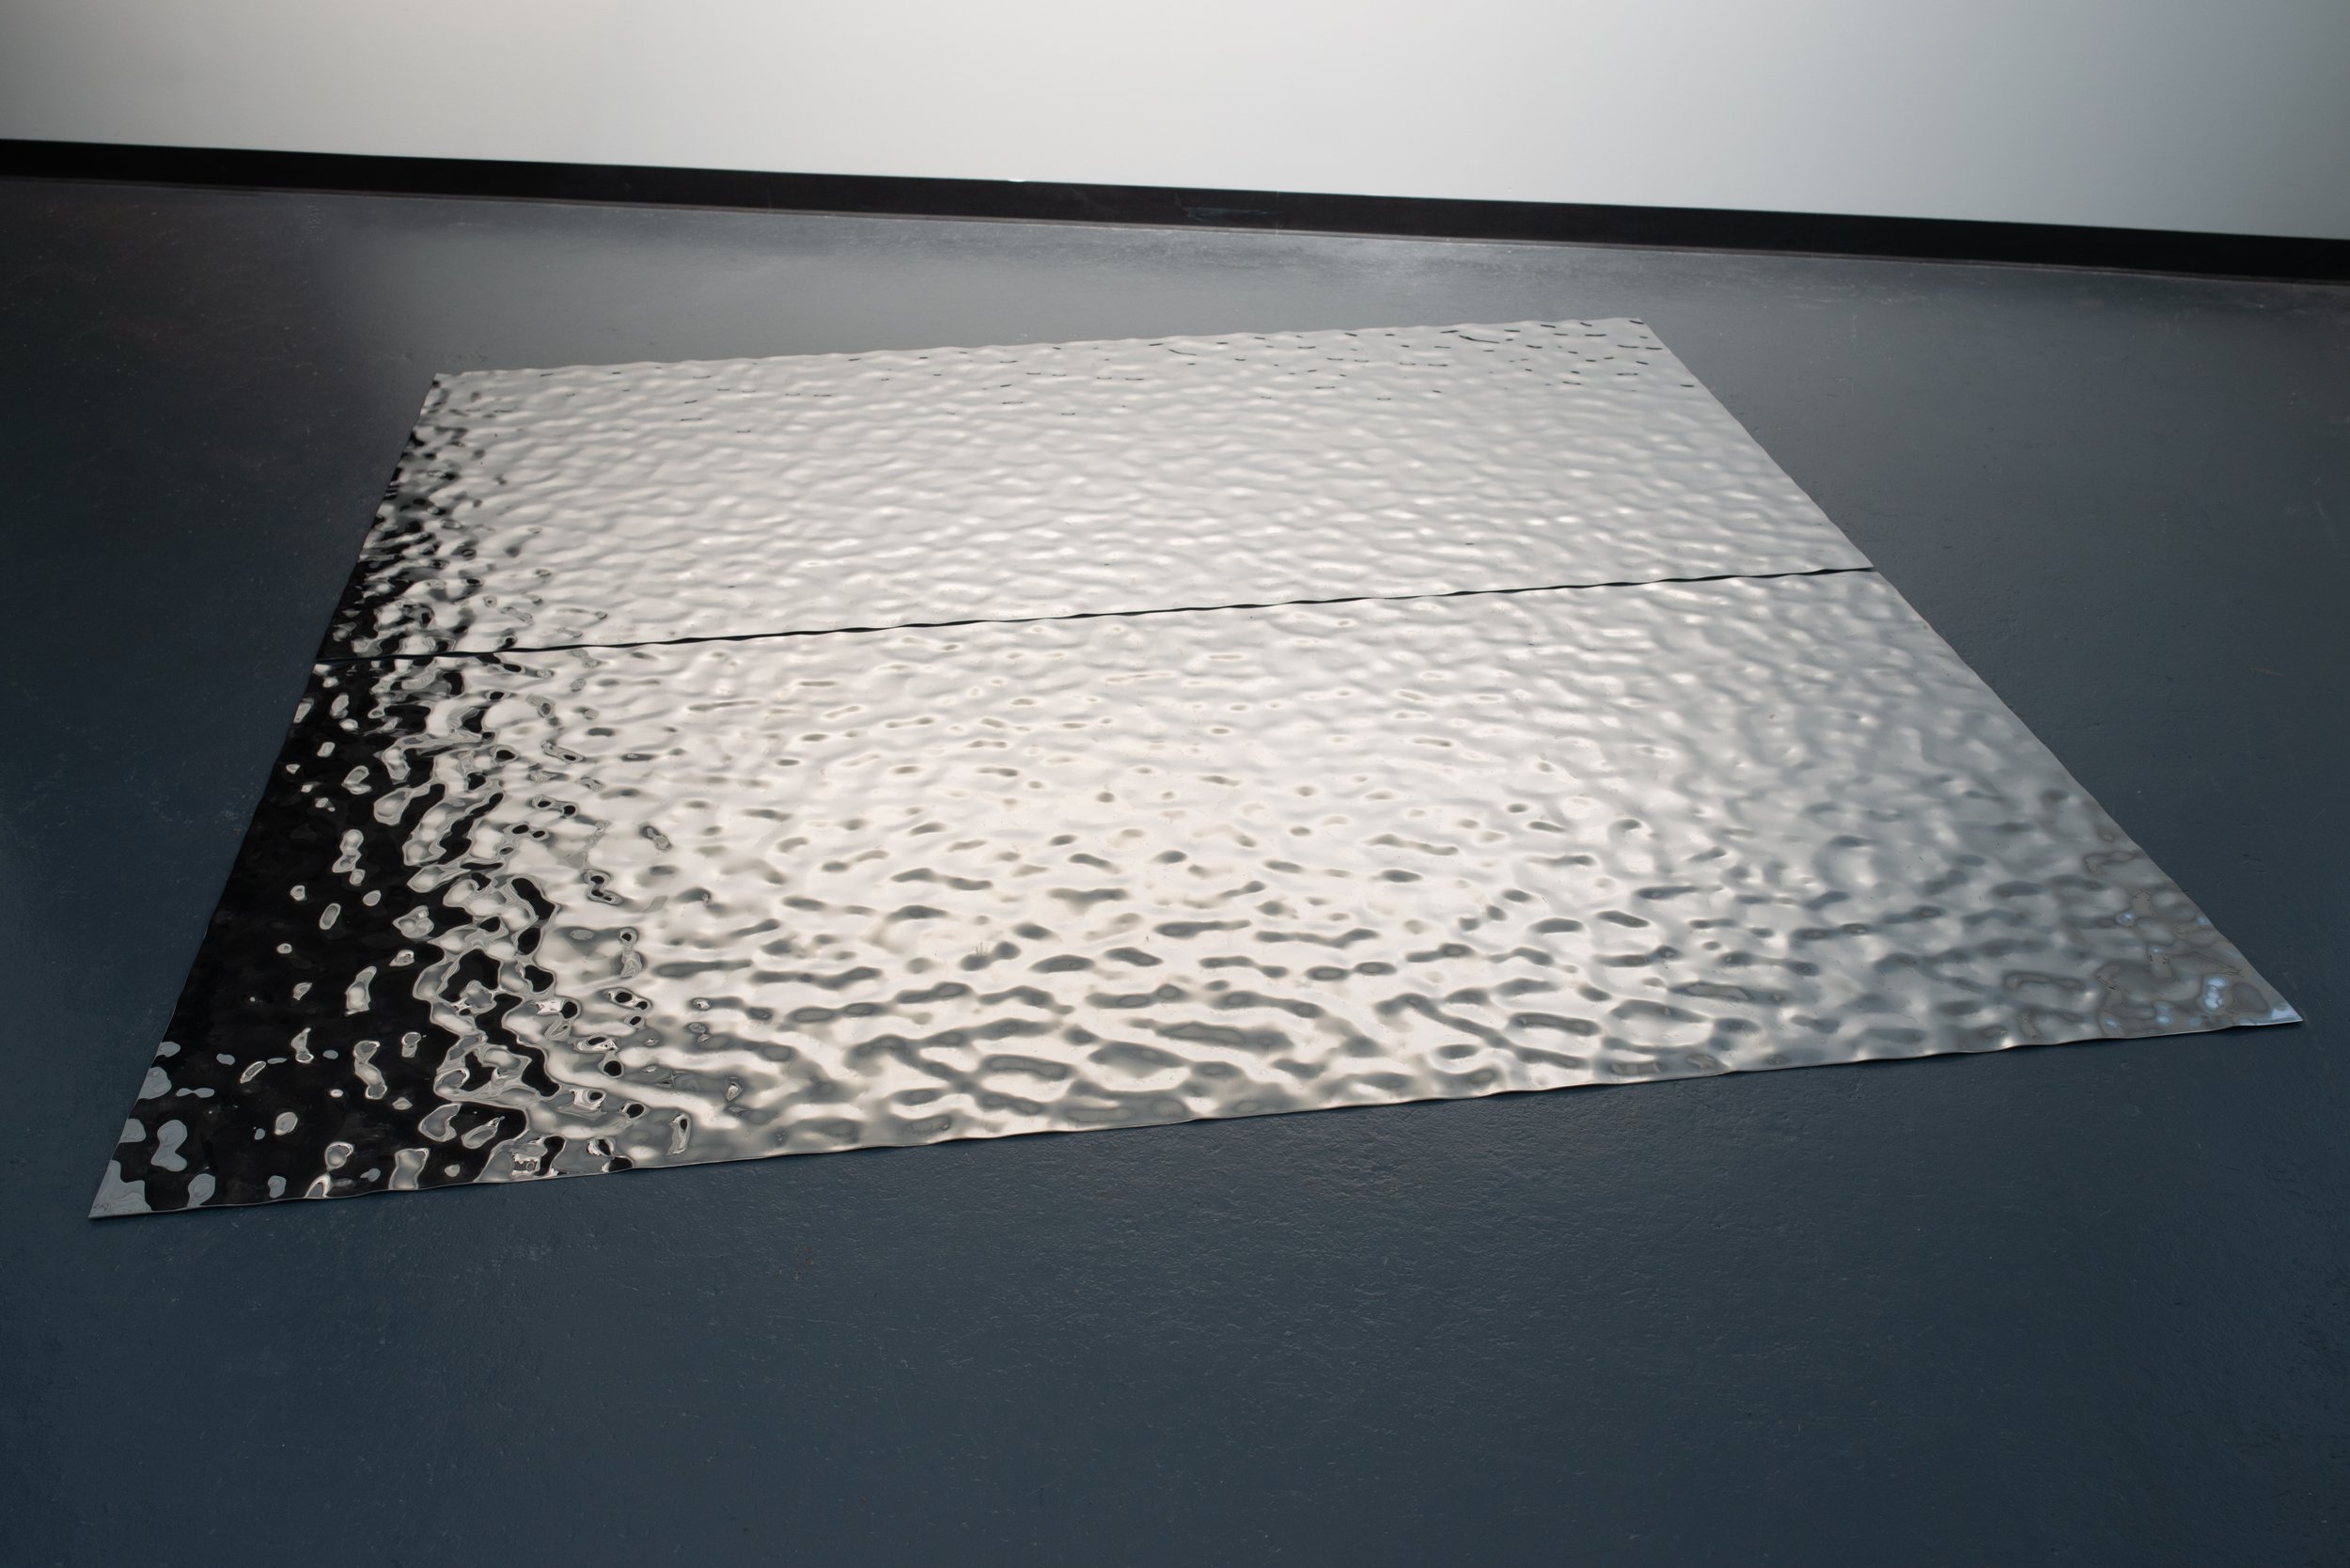 Mizukagami_(The_shadow_of_the_moon_reflected_in_water)_0.25x95.875x95.875in_Stainless_Steel_Miya_Ando_2019_16.jpg